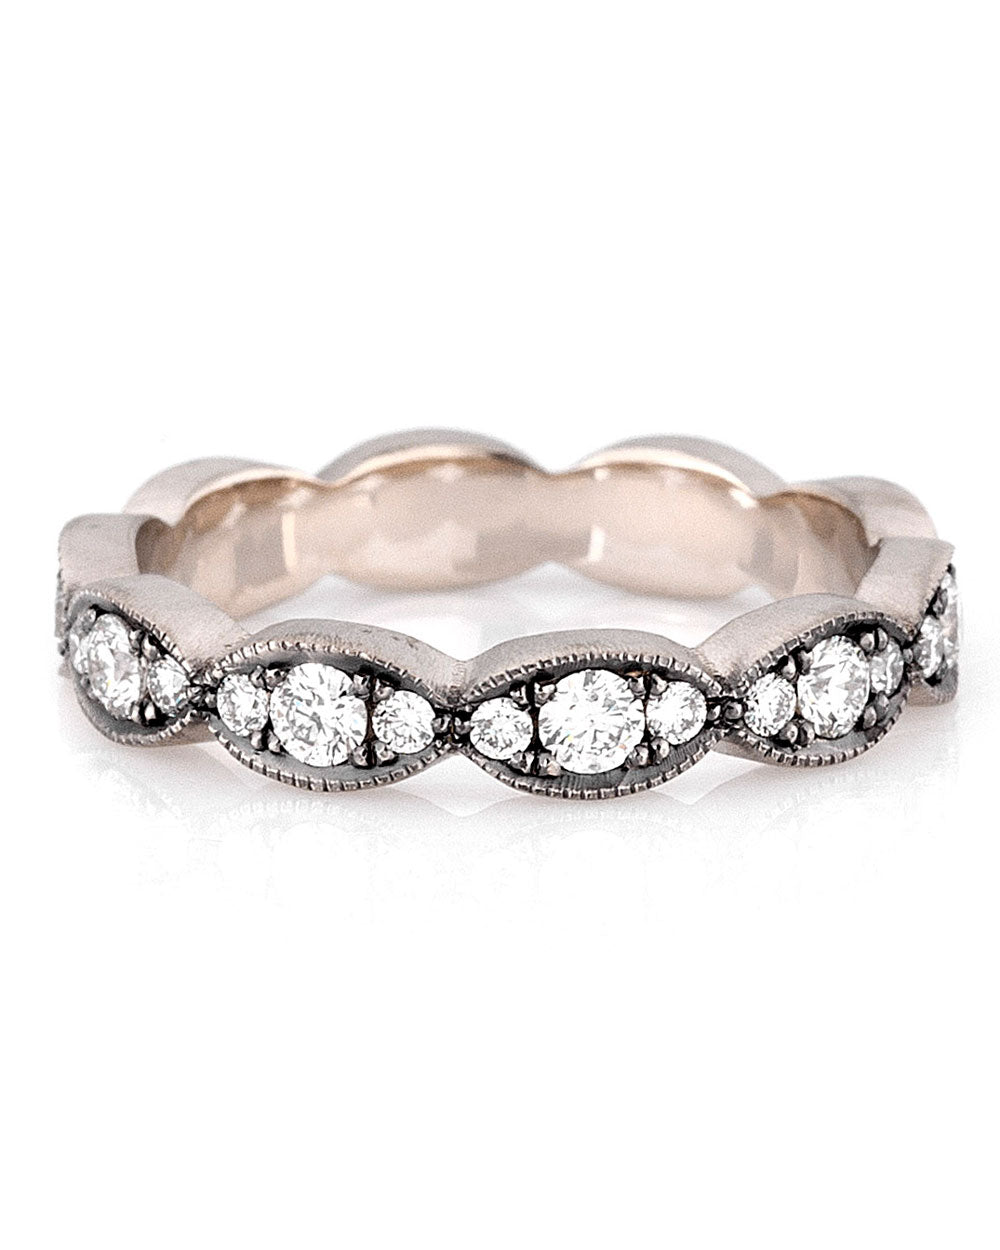 White Gold Diamond Moval Ring Band